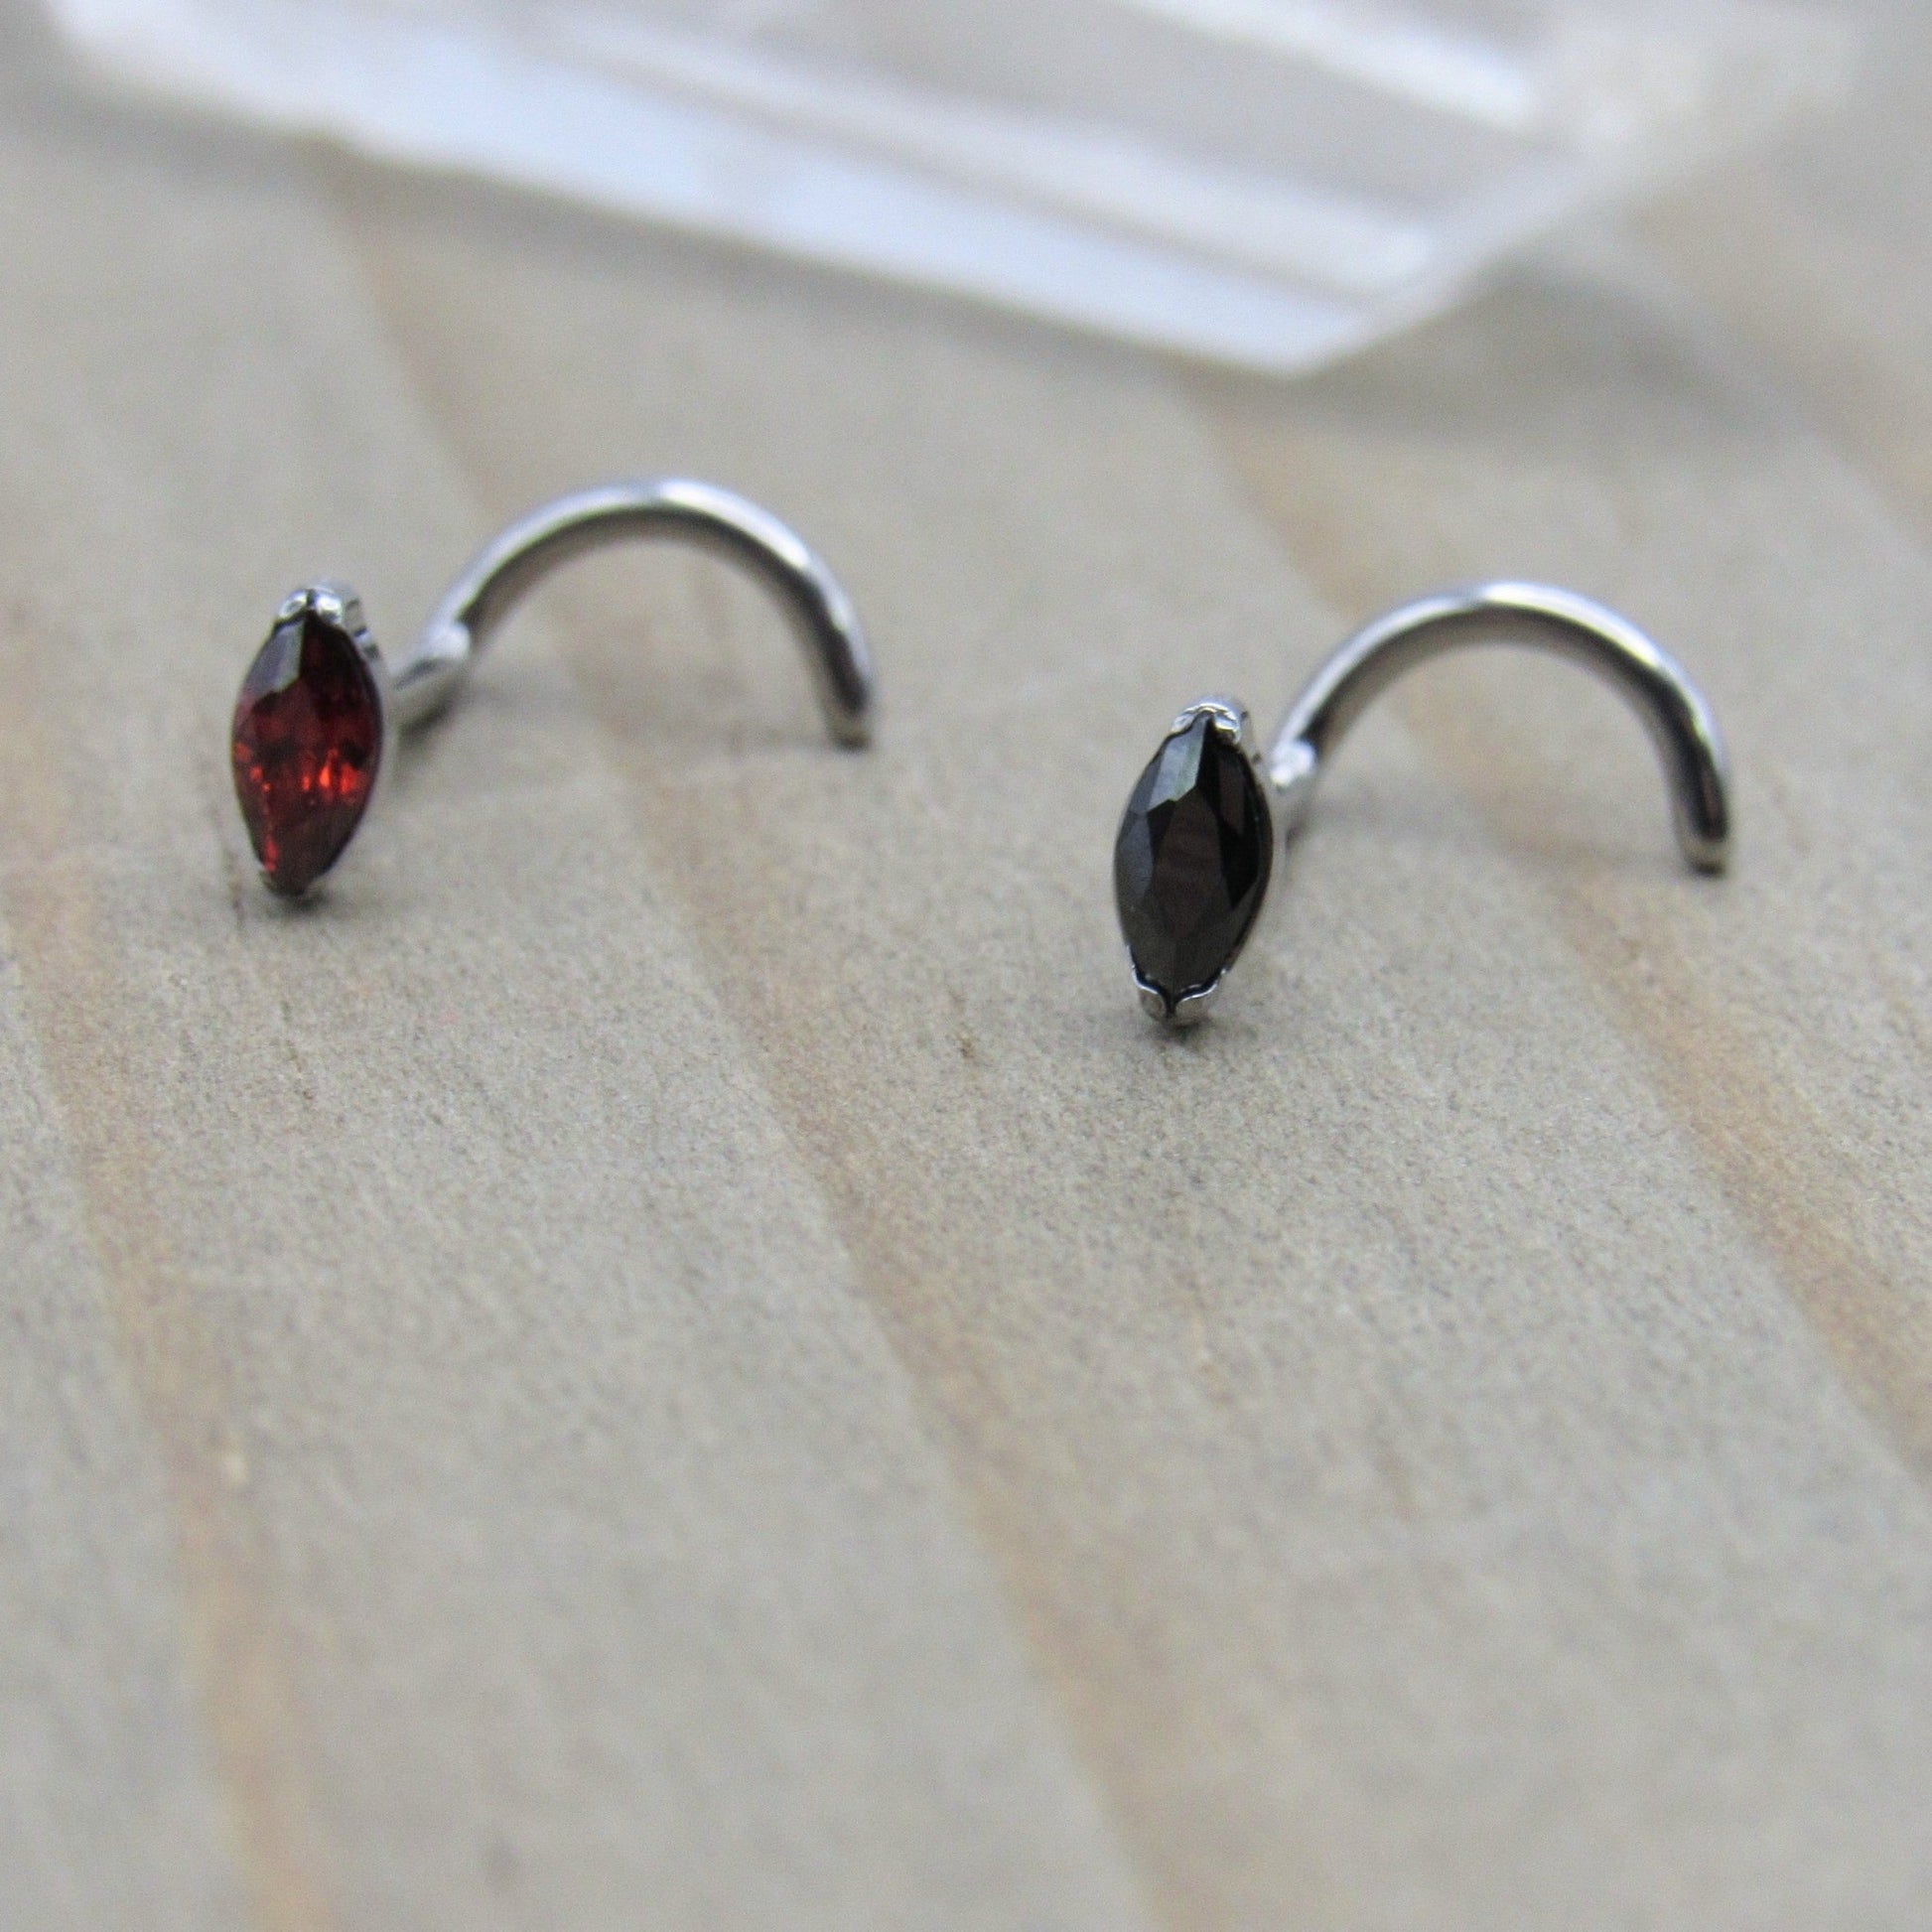 Titanium nose ring 18g screw nostril stud 3mm marquise red or black gemstone body jewelry ring - Siren Body Jewelry